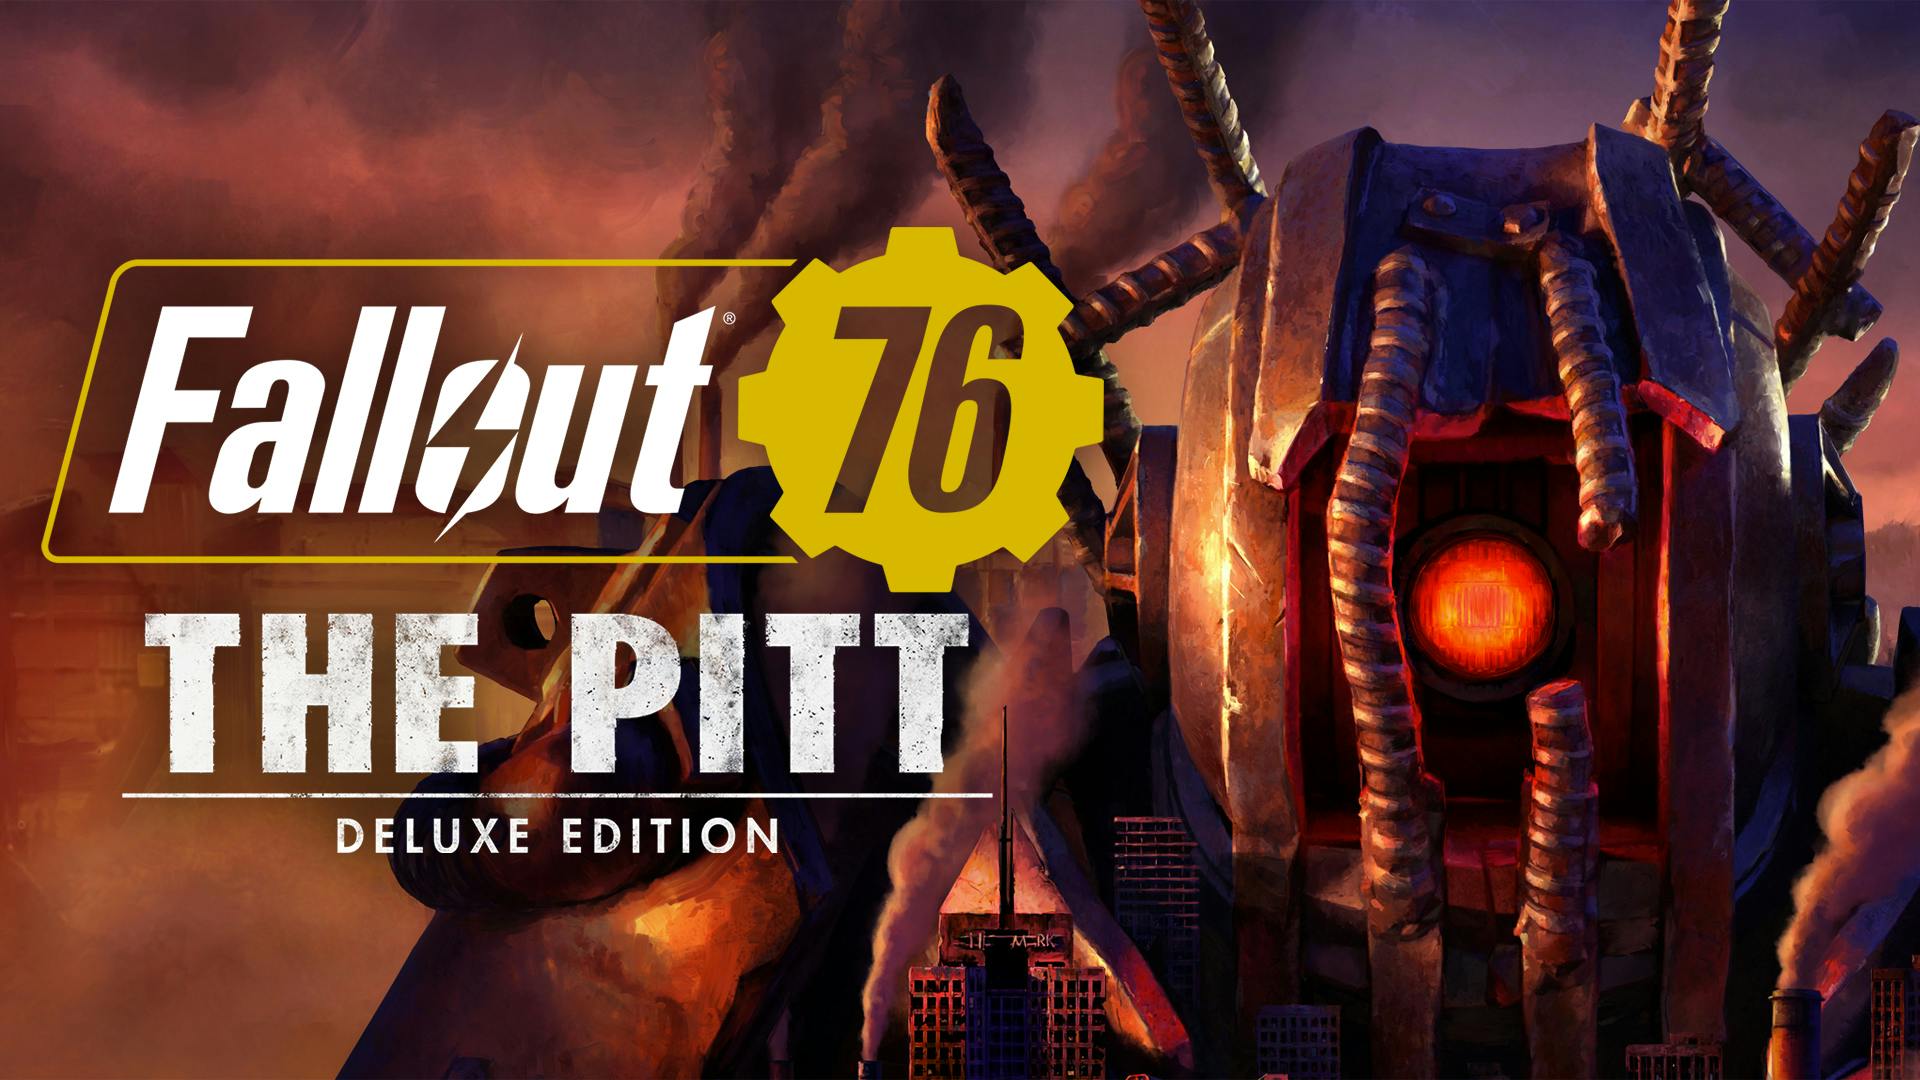 Питт фоллаут. Fallout 76 the Pitt Deluxe. Fallout 76: Steel Dawn Deluxe. Fallout 76 Tricentennial Edition Xbox. Fallout the Pitt.